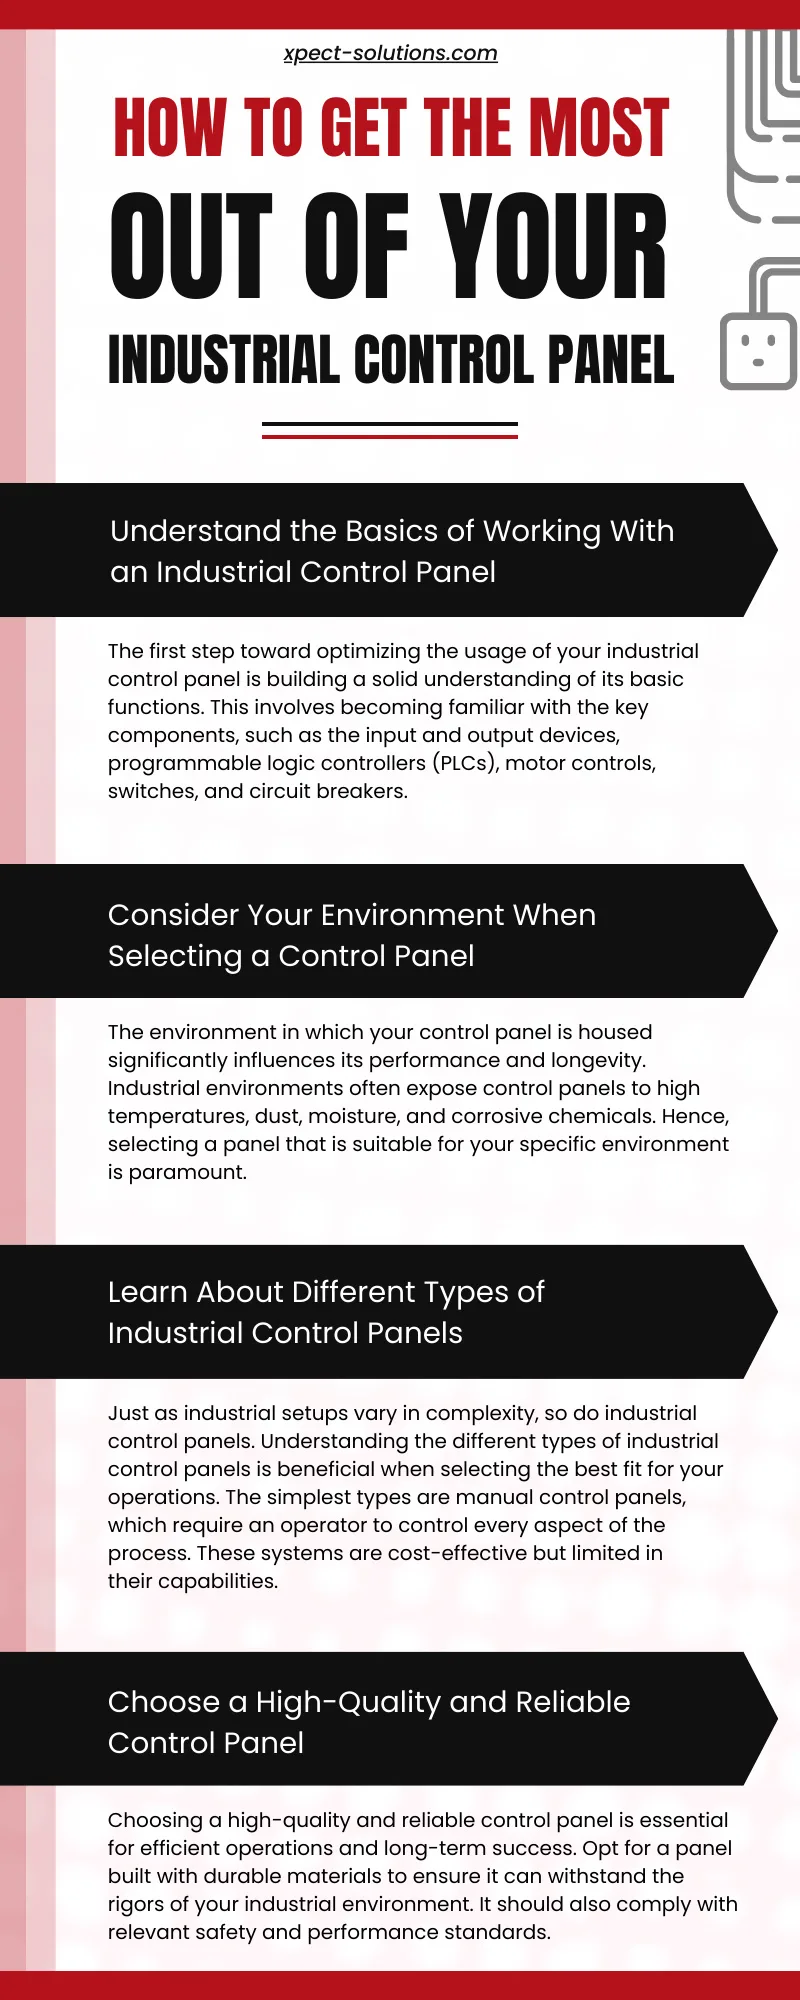 How To Get the Most out of Your Industrial Control Panel